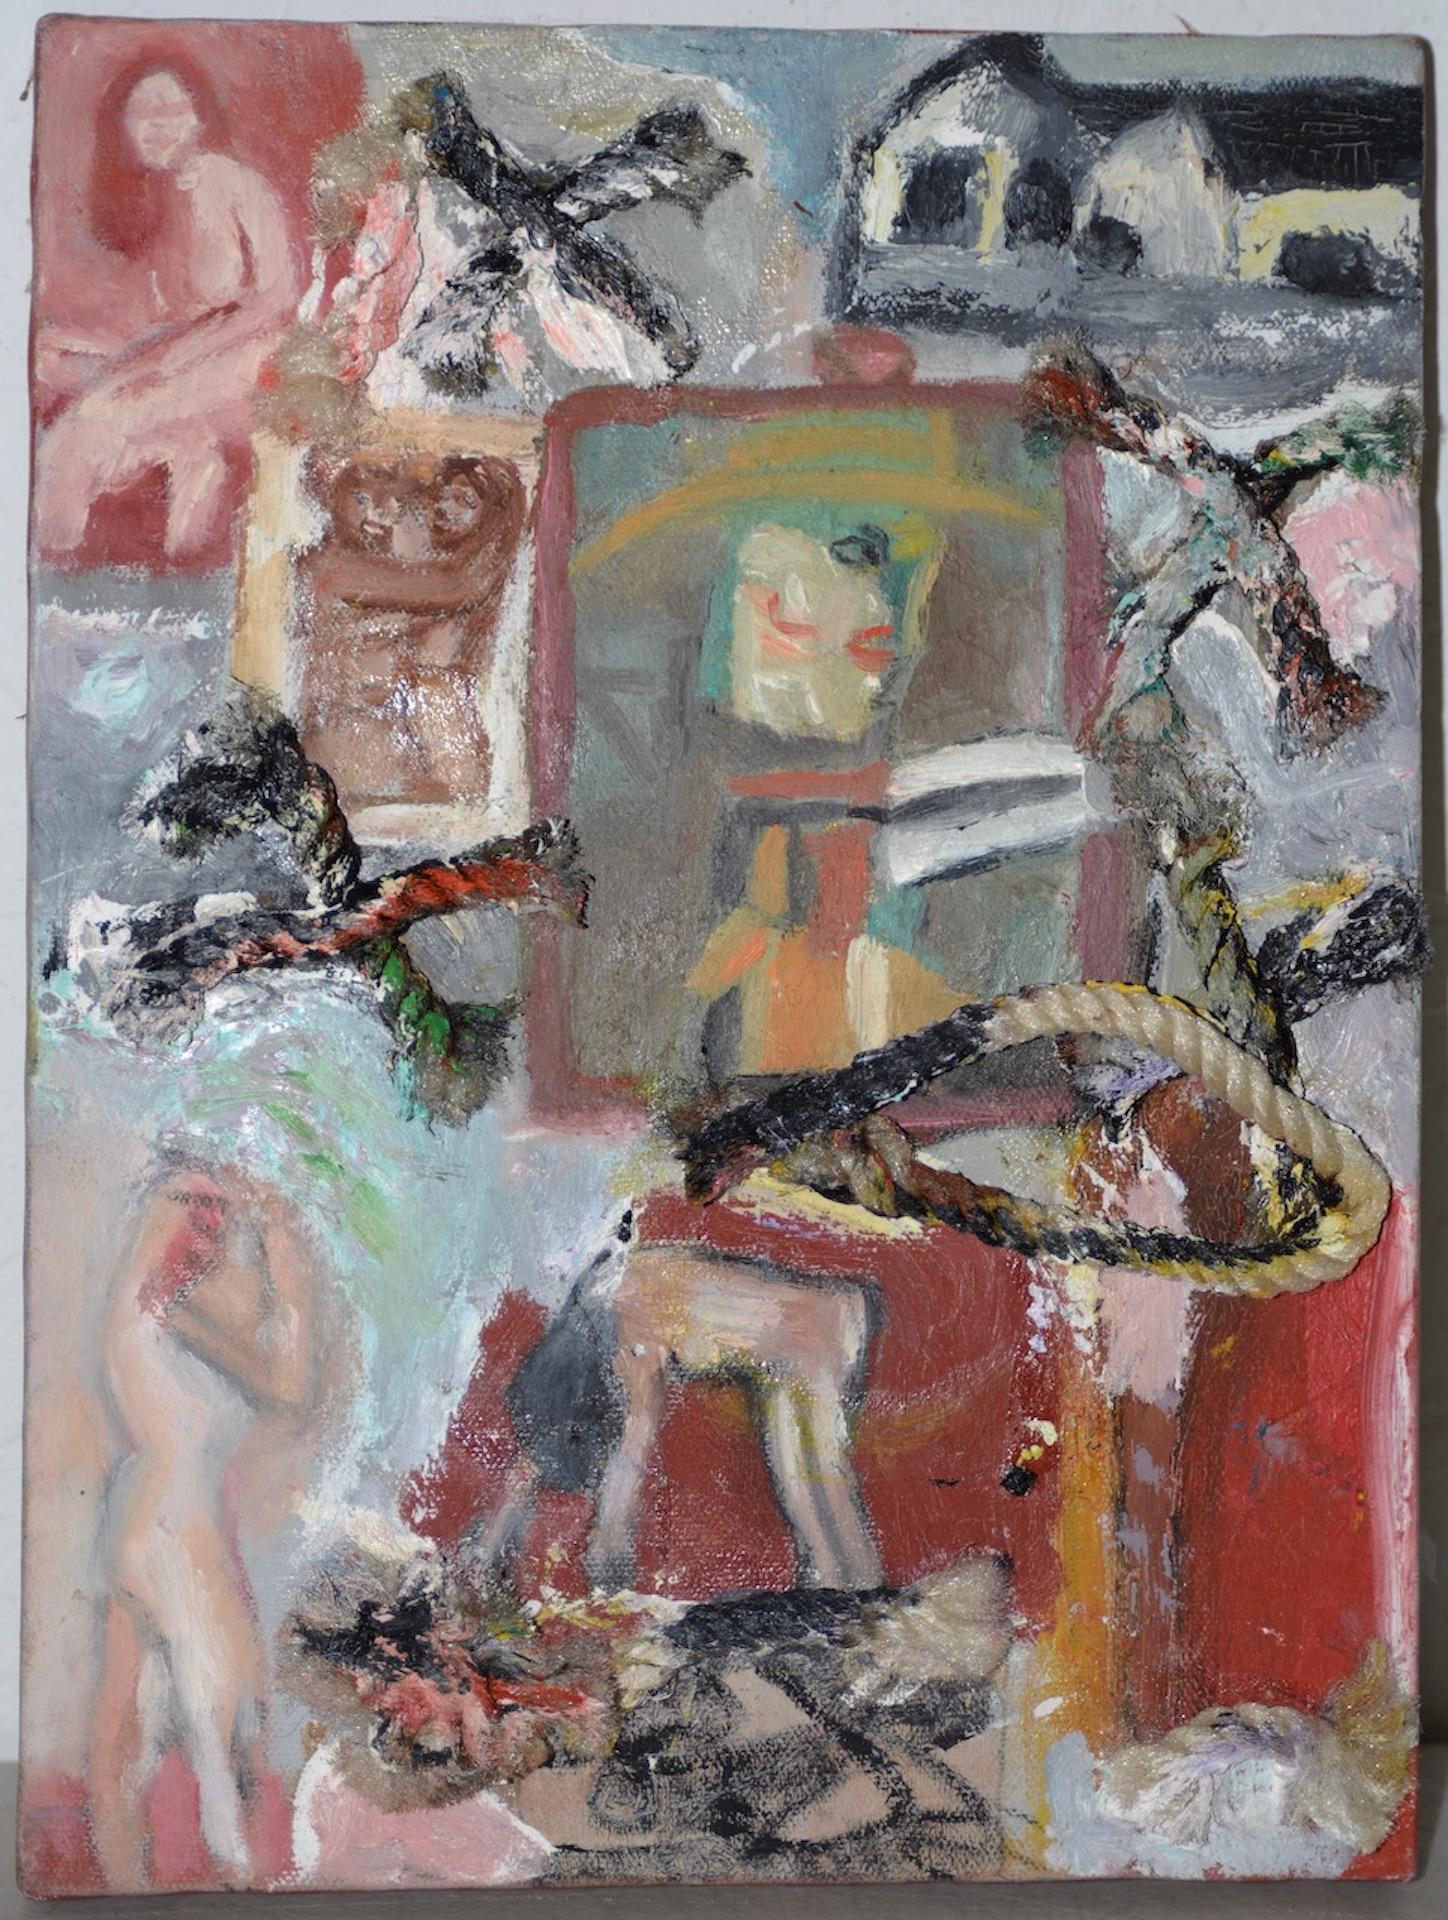 Arthur Krakower (1921-2009) Original Mixed Media w/ Oil c.1998

Mixed media with rope and oil paints. Fabulous nude figures in an abstract landscape.

Dimensions 9" x 12".

Signed verso. Very good condition.

We have a few original paintings by this